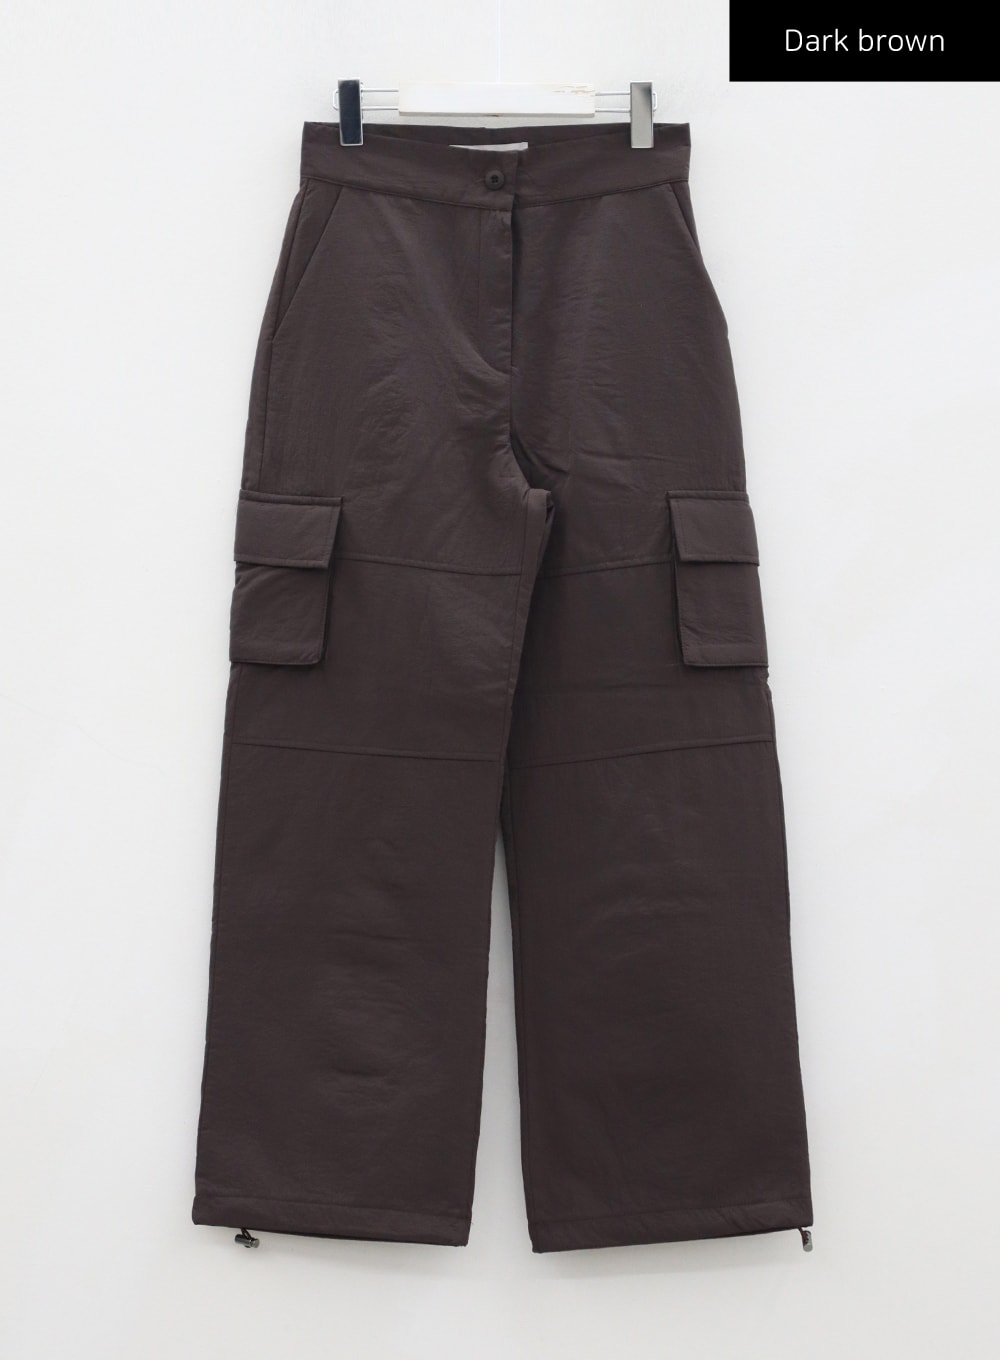 Buy Charcoal Grey Parachute Cotton Cargo Trousers from Next Poland